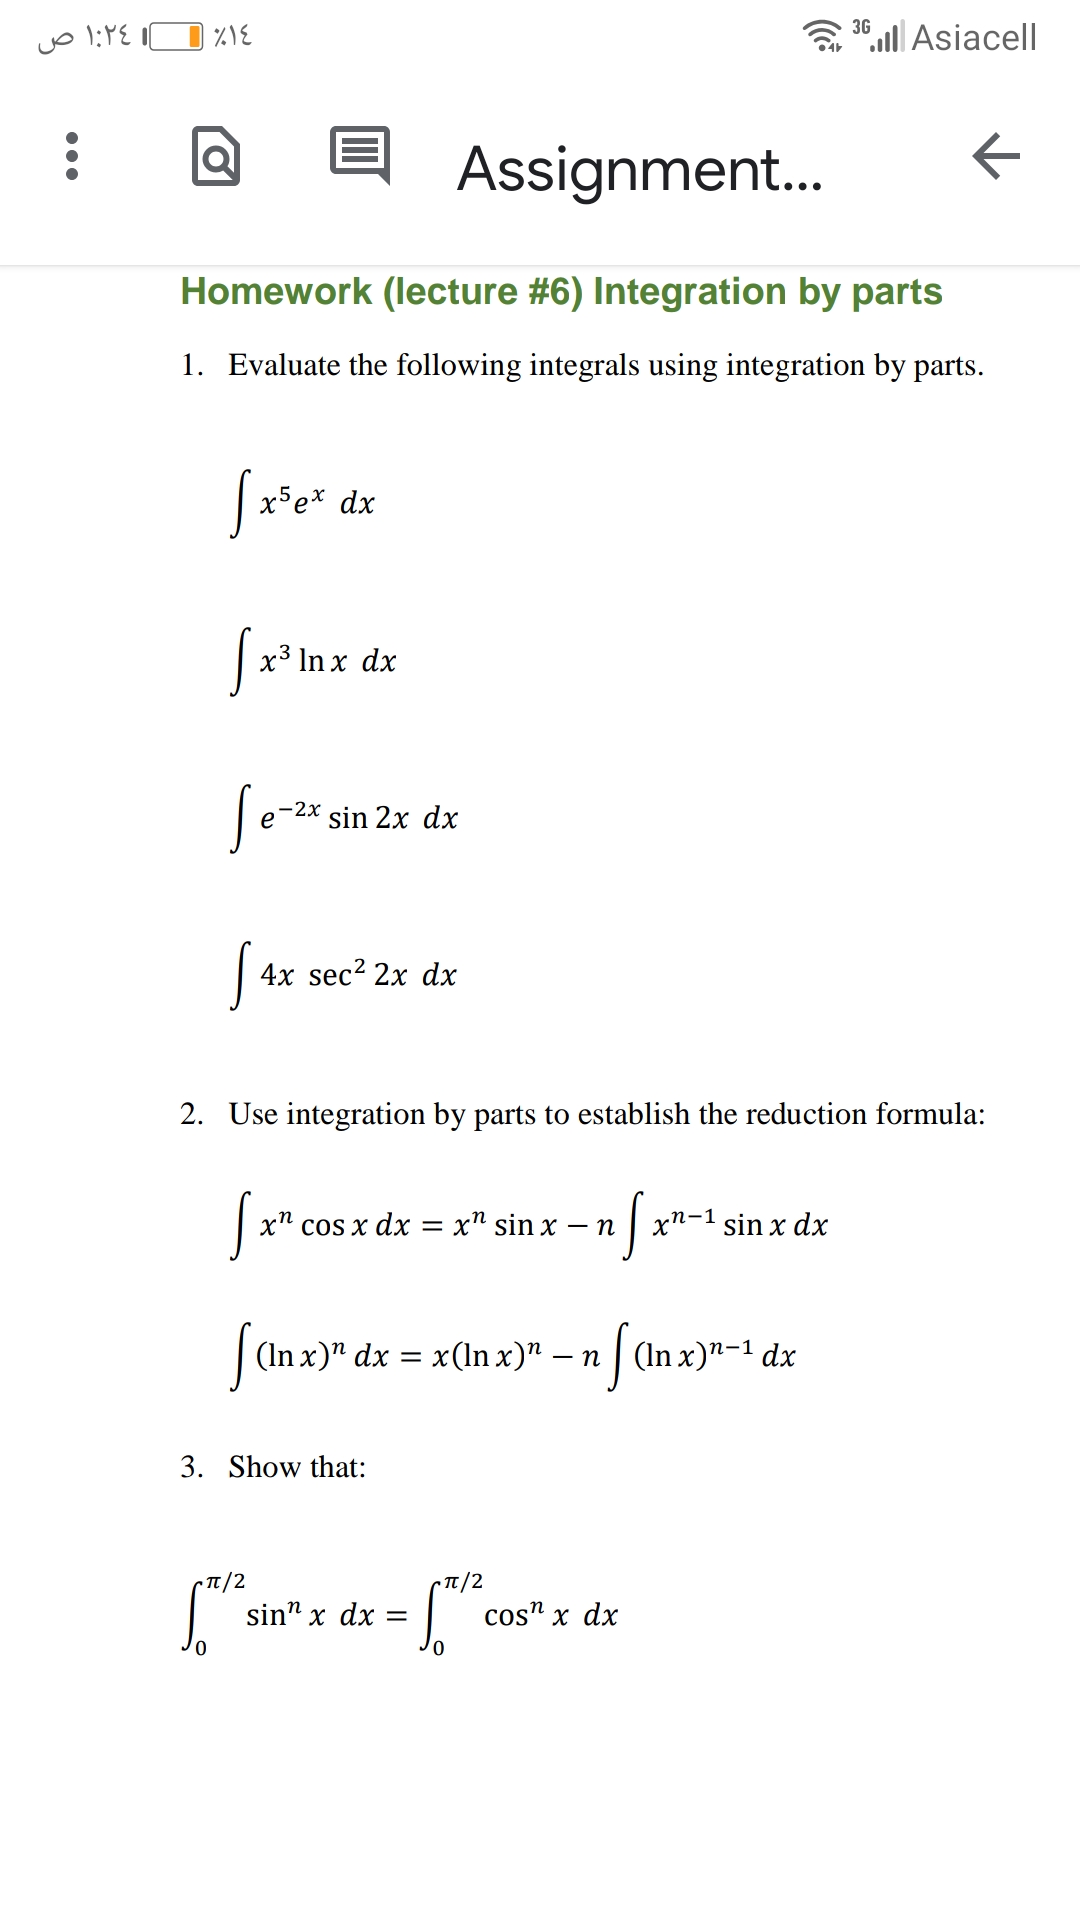 Evaluate the following integrals using integration by parts.
x5e* dx
|x3 In x dx
-2x
sin 2x dx
